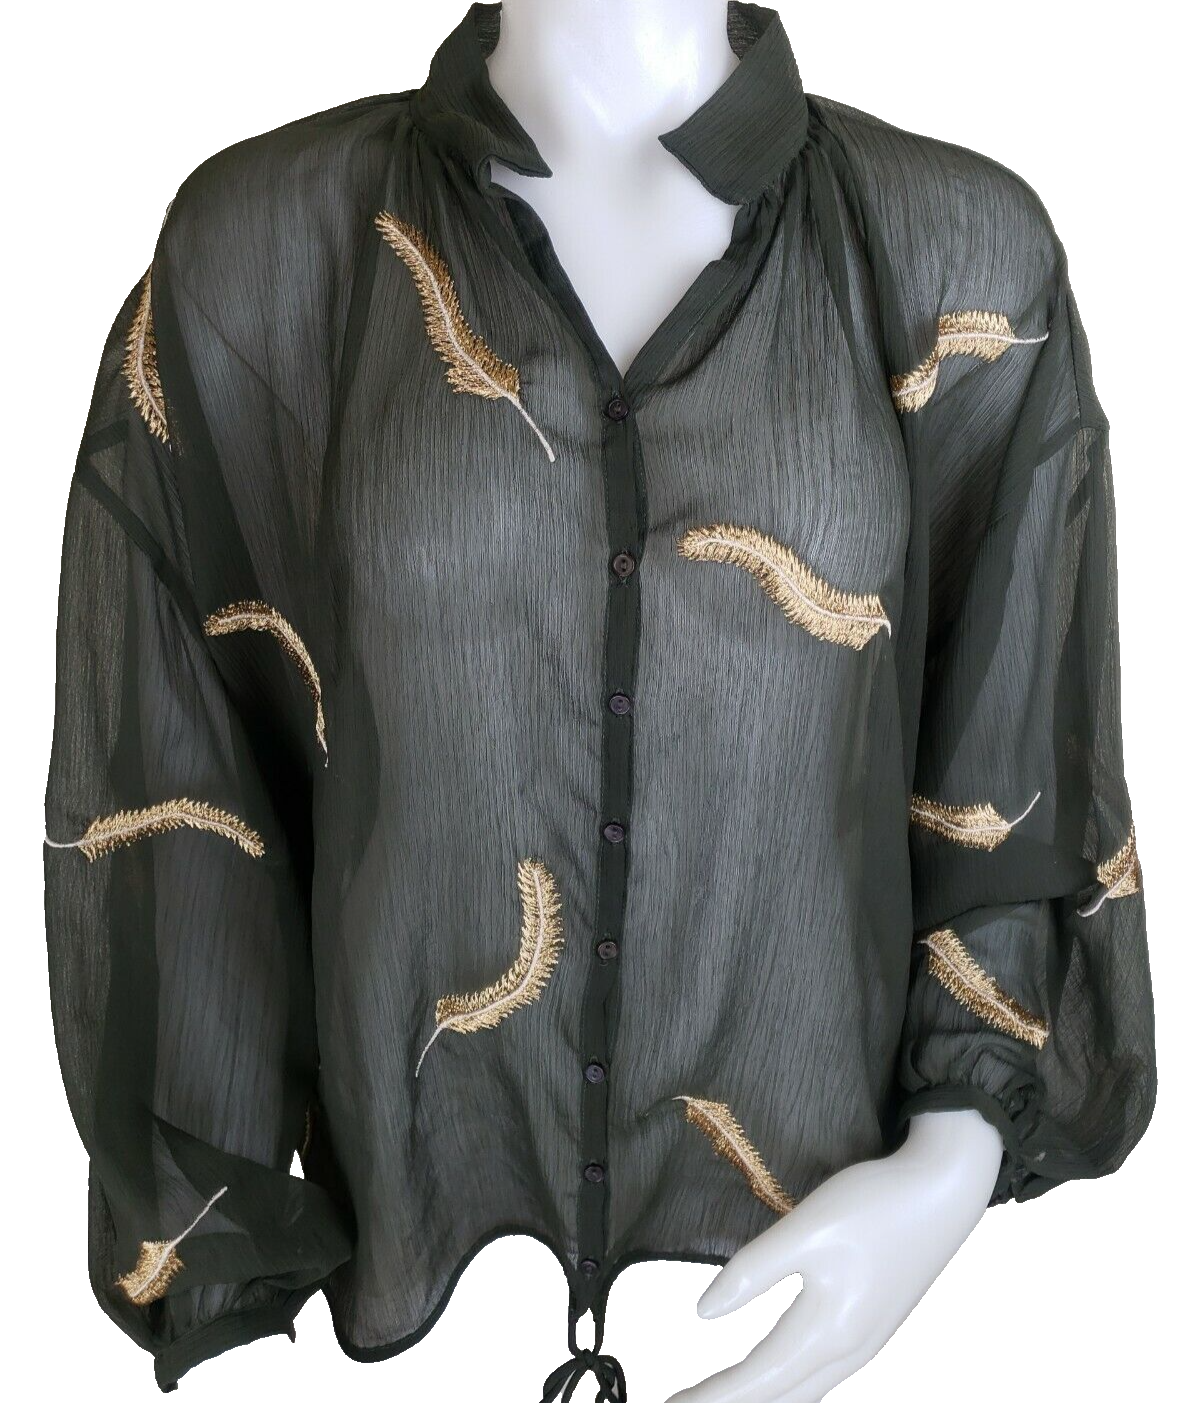 Primary image for Miss Me Sheer Blouse Womens M Olive Green Gold Embroidered Feather 3/4 Sleeve